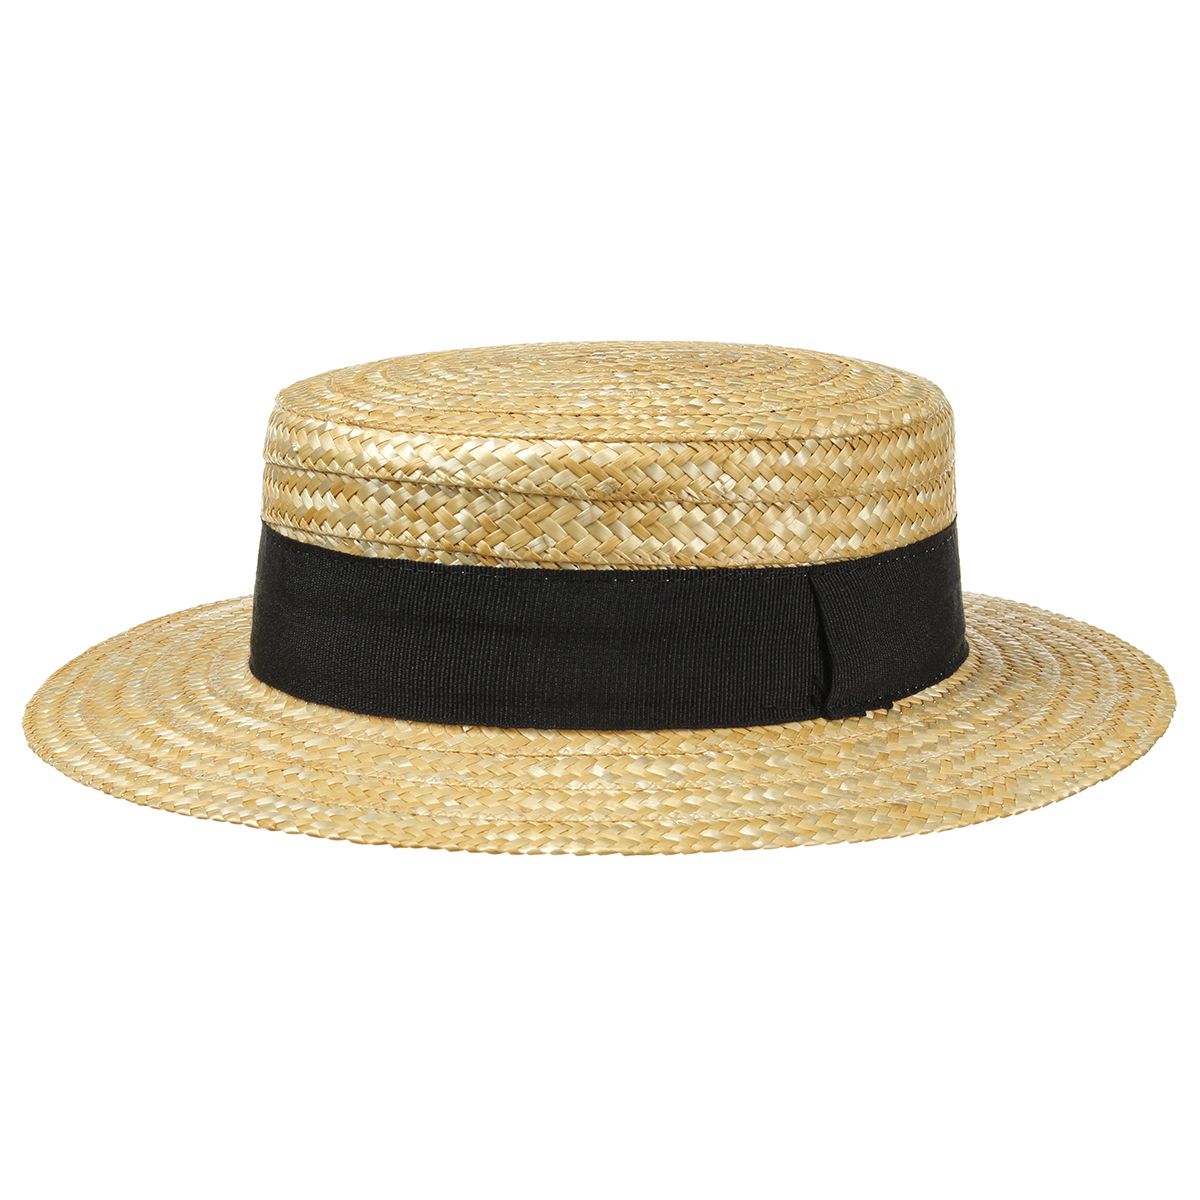 Color-Block By FelyM.: STRAW SUMMER HATS - I CAPPELLI PIÙ IN VOGA DELL ...